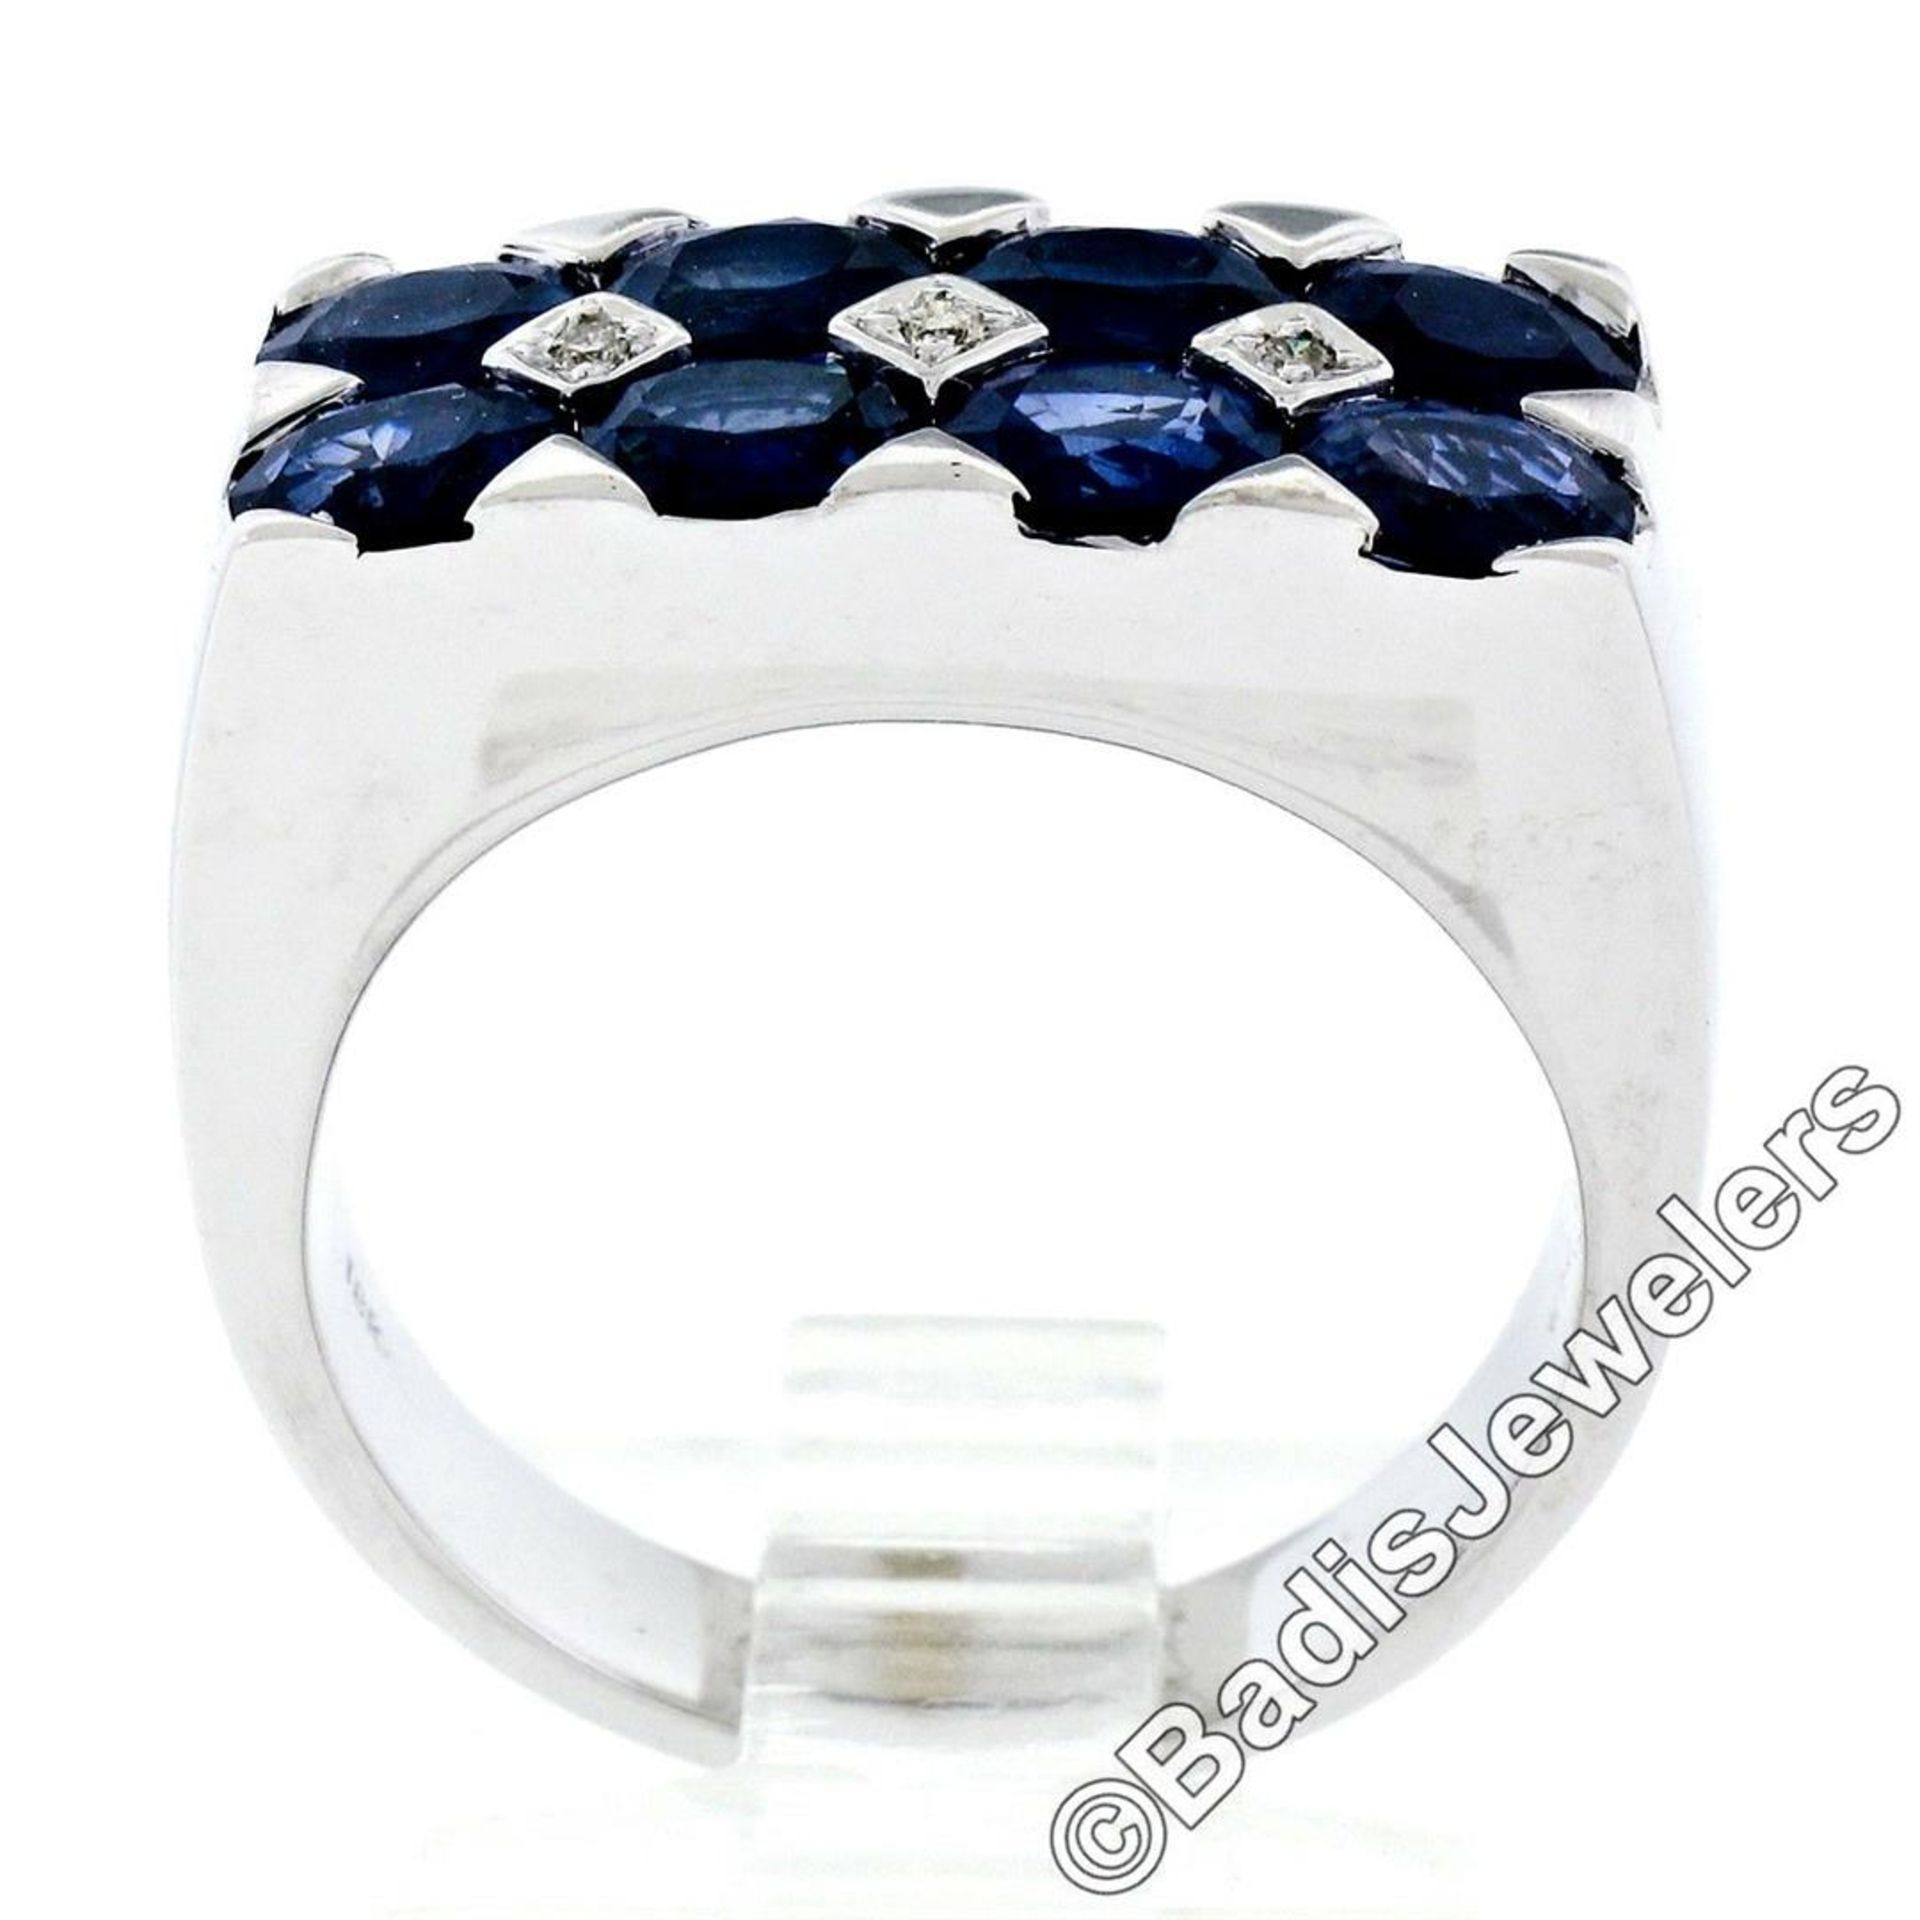 18kt White Gold 4.03 ctw Dual Row Oval Cut Sapphire & Diamond Band Ring - Image 6 of 9